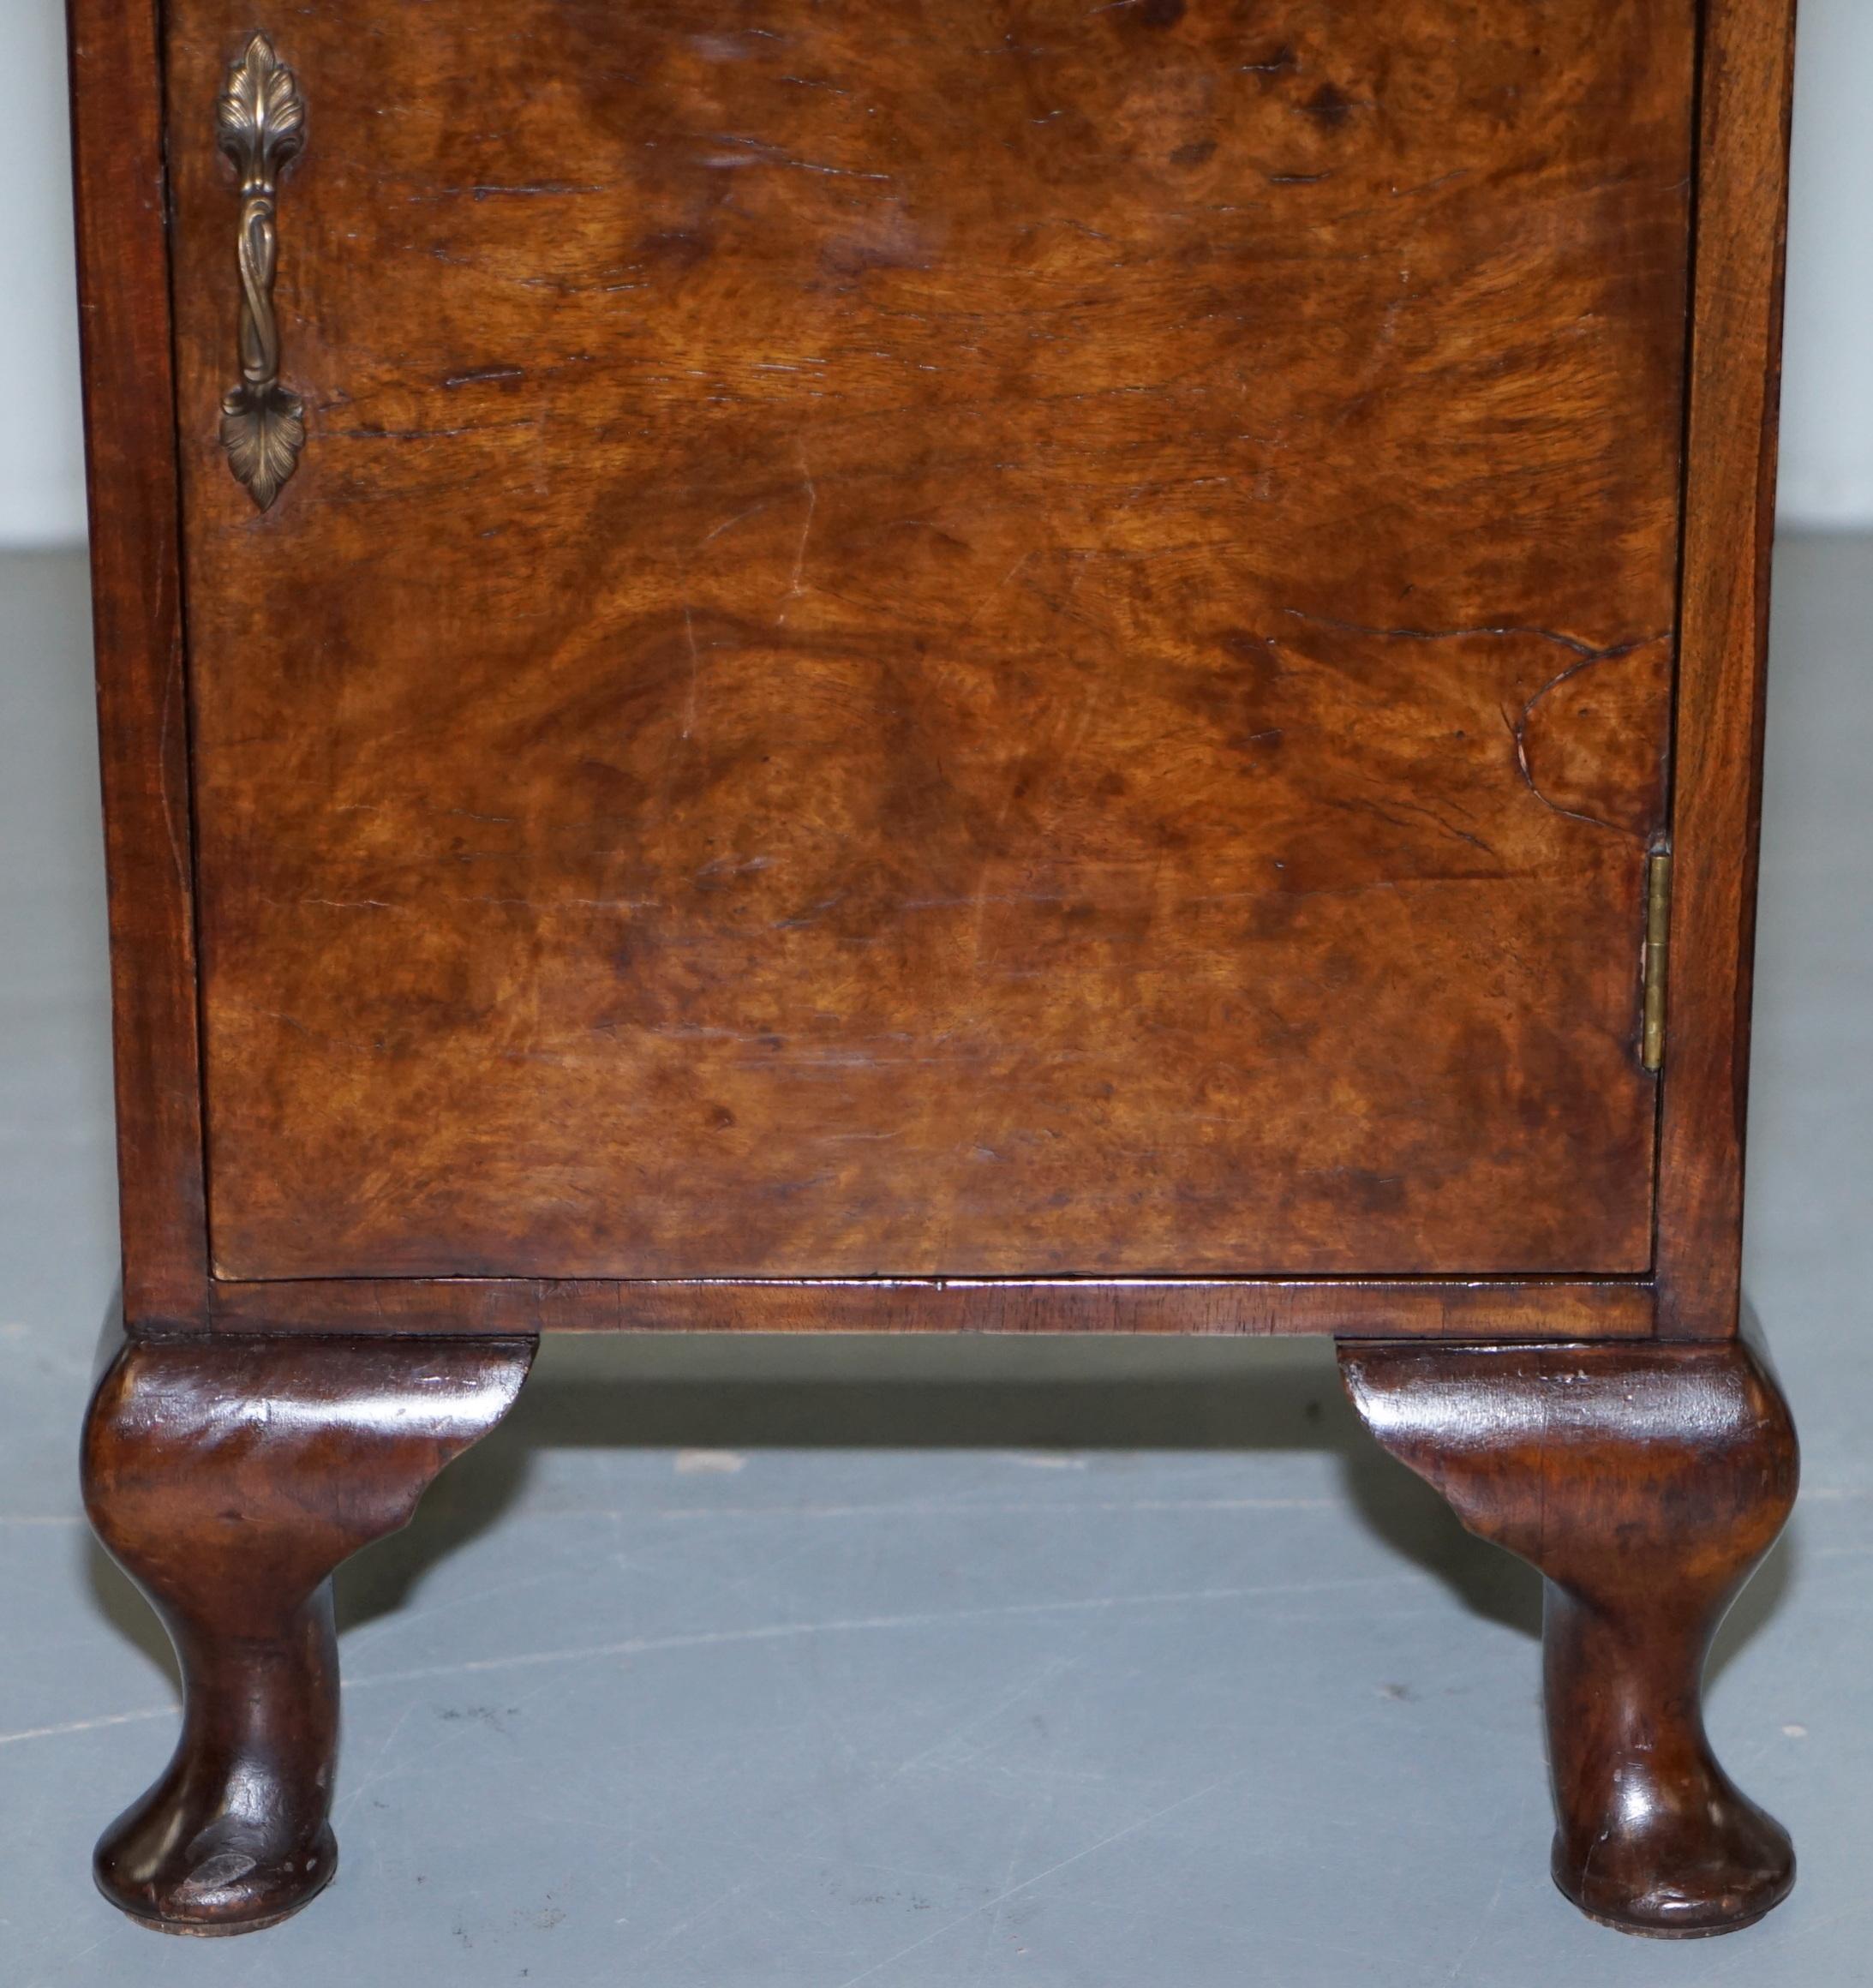 Early 20th Century Rare 1920s Art Deco Burr Walnut Side Table with Butlers Serving Tray and Drawer